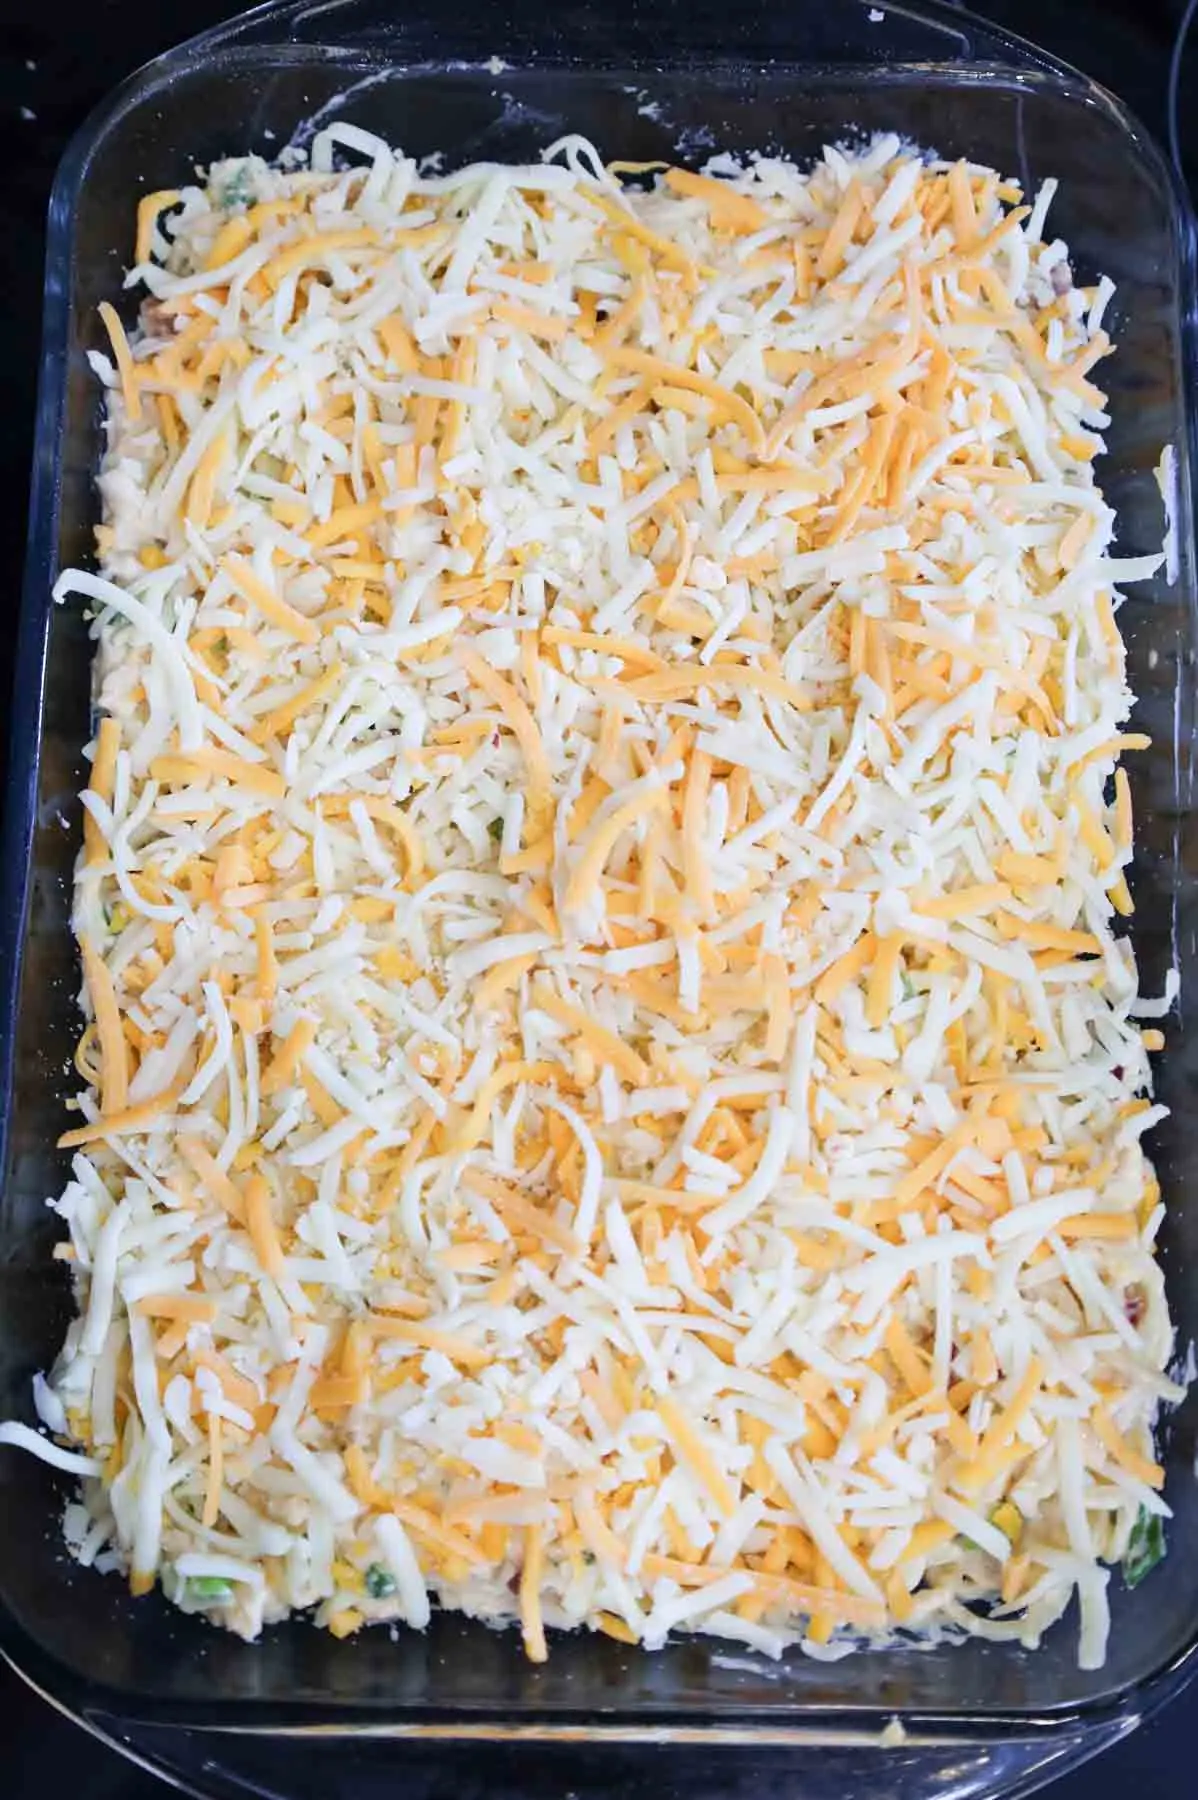 shredded chicken on top of creamy spaghetti in a baking dish